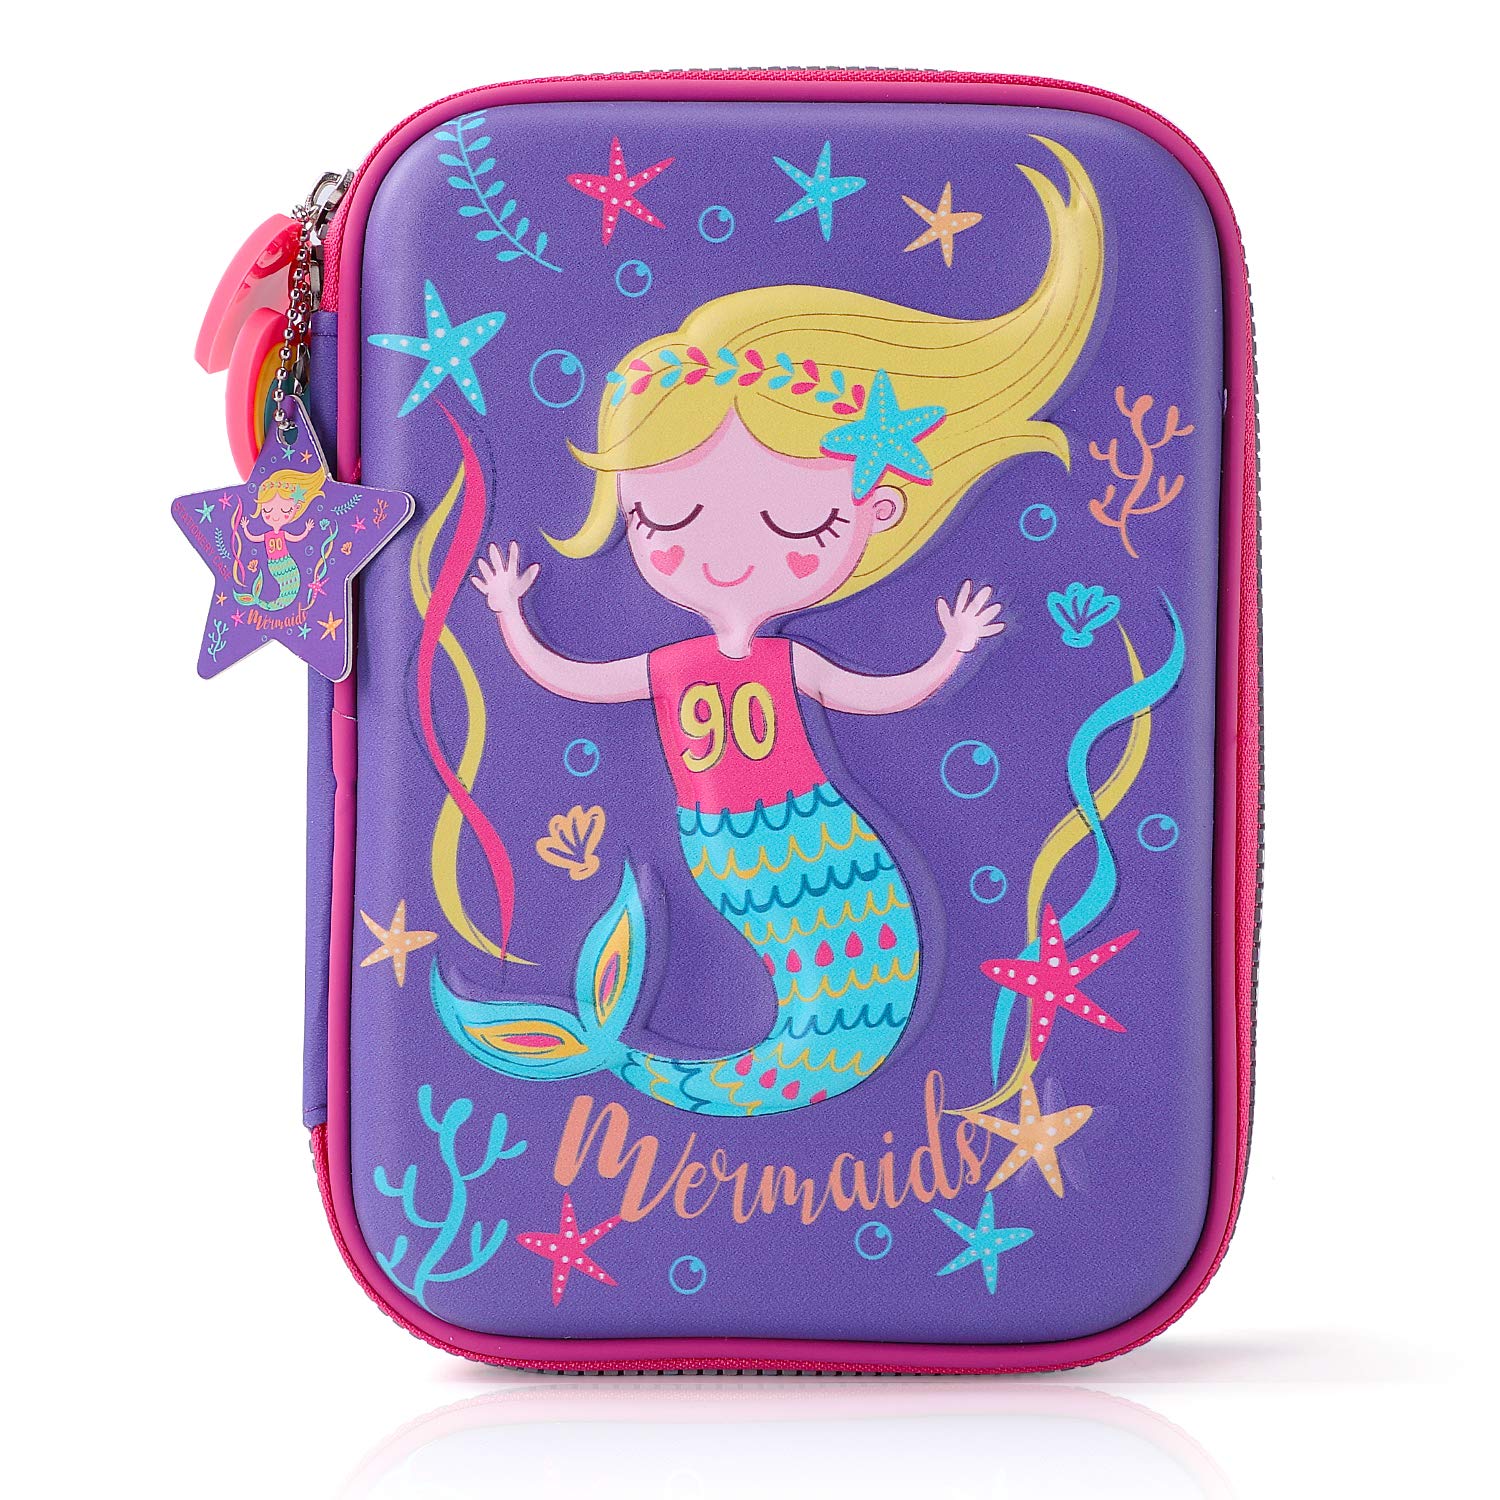 Powerking Pencil Case,Hardtop Mermaid Pencil Holder Box for Kids with bulit-in Pen Pencil Slots, Girls and Boys Painted Pencil Stationery Organizer